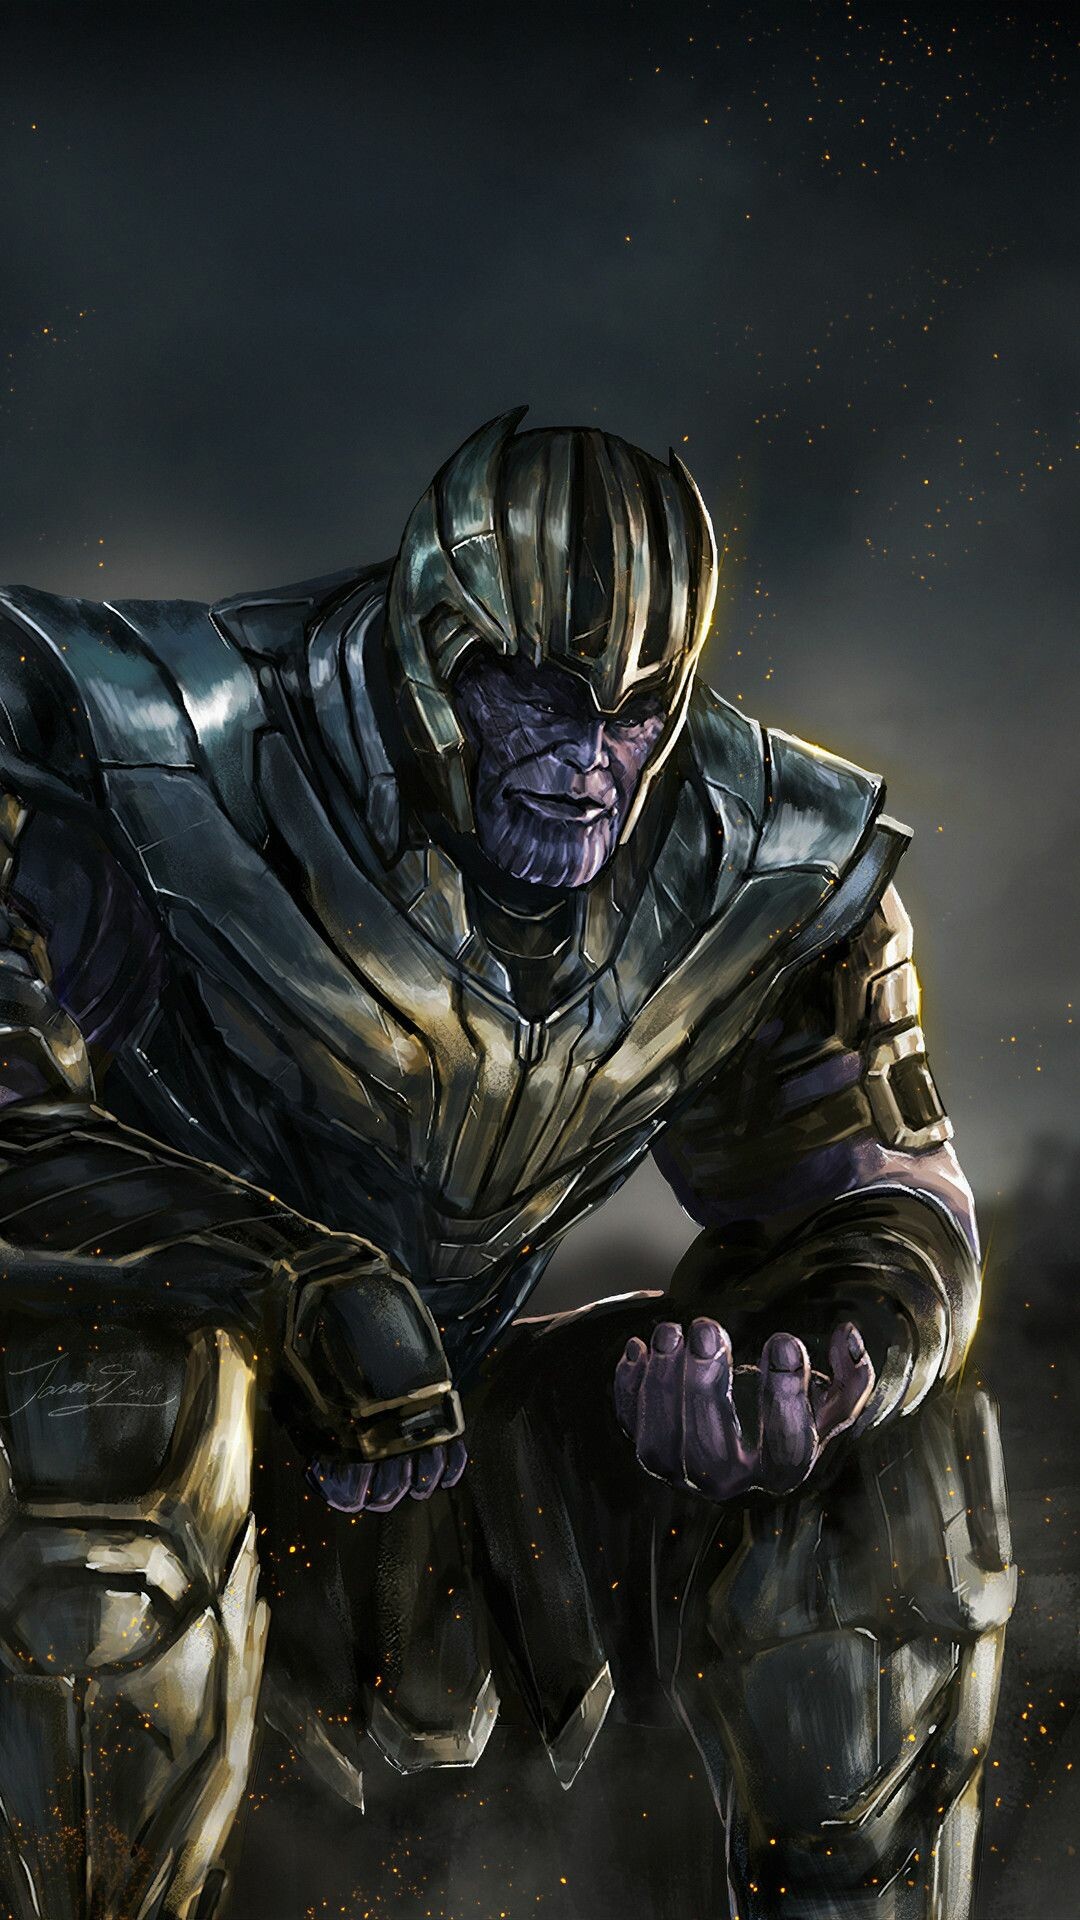 Marvel Villain: Thanos, The most evil, bloodthirsty, and powerful hero in the universe. 1080x1920 Full HD Wallpaper.